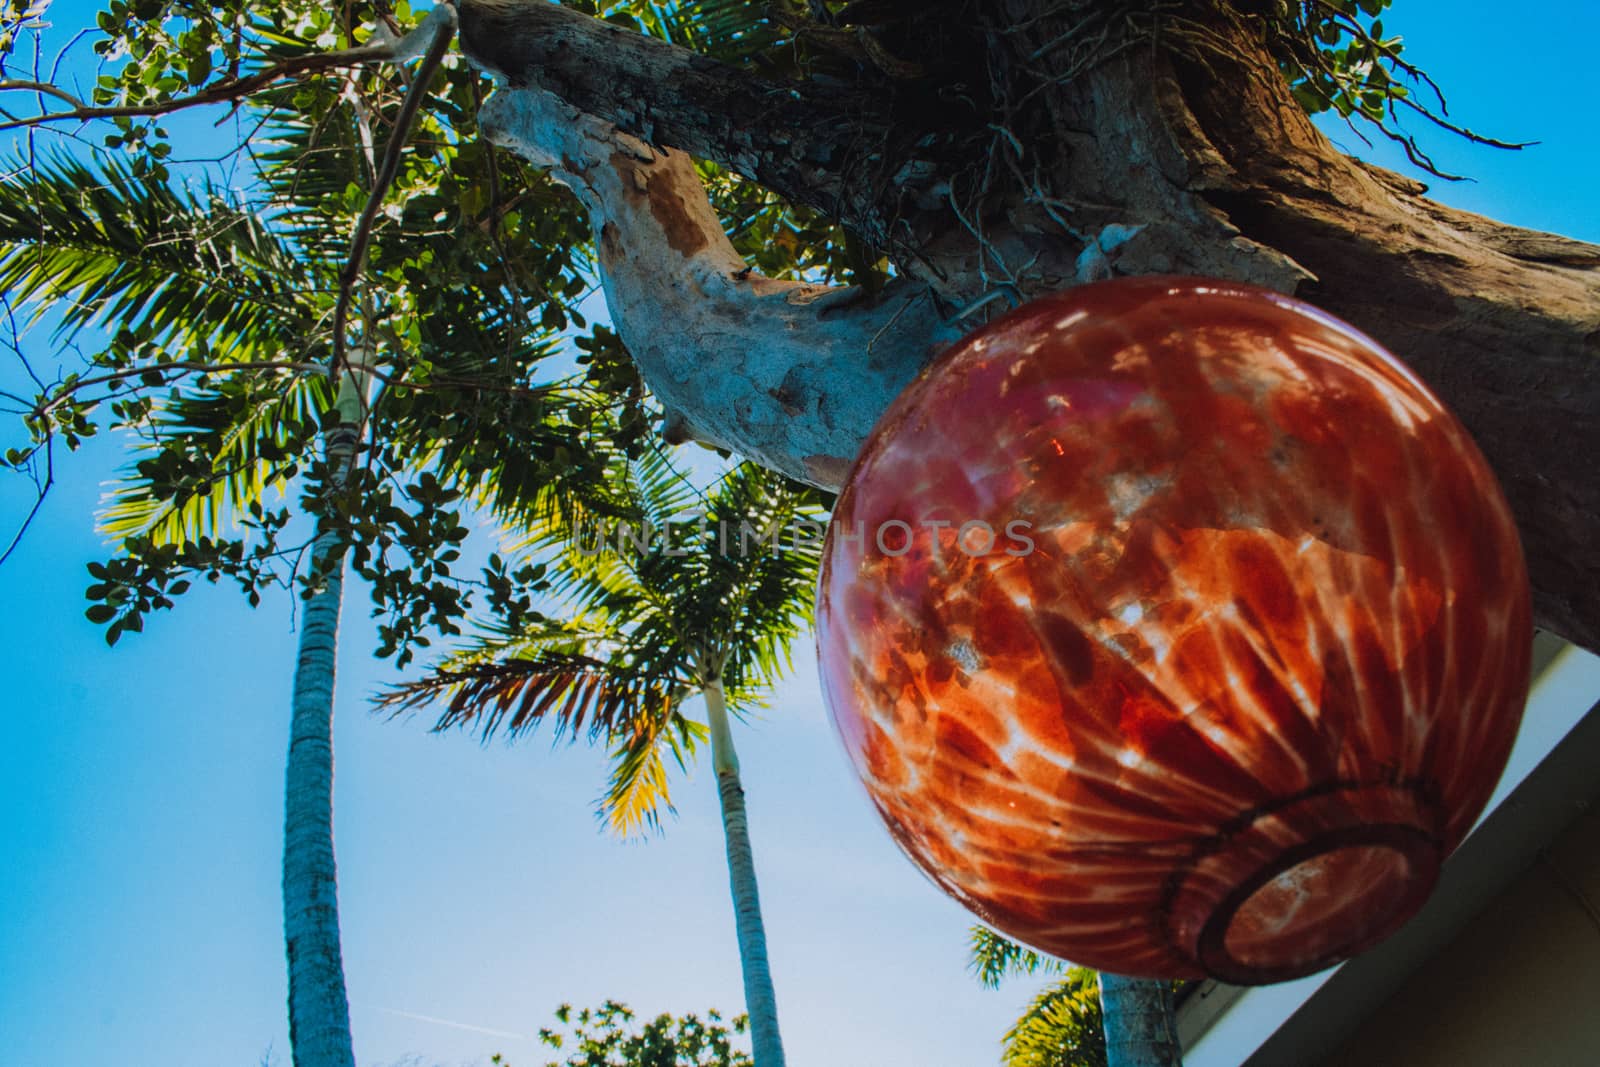 A Large Round Tree Ornament Hanging From a Palm Tree